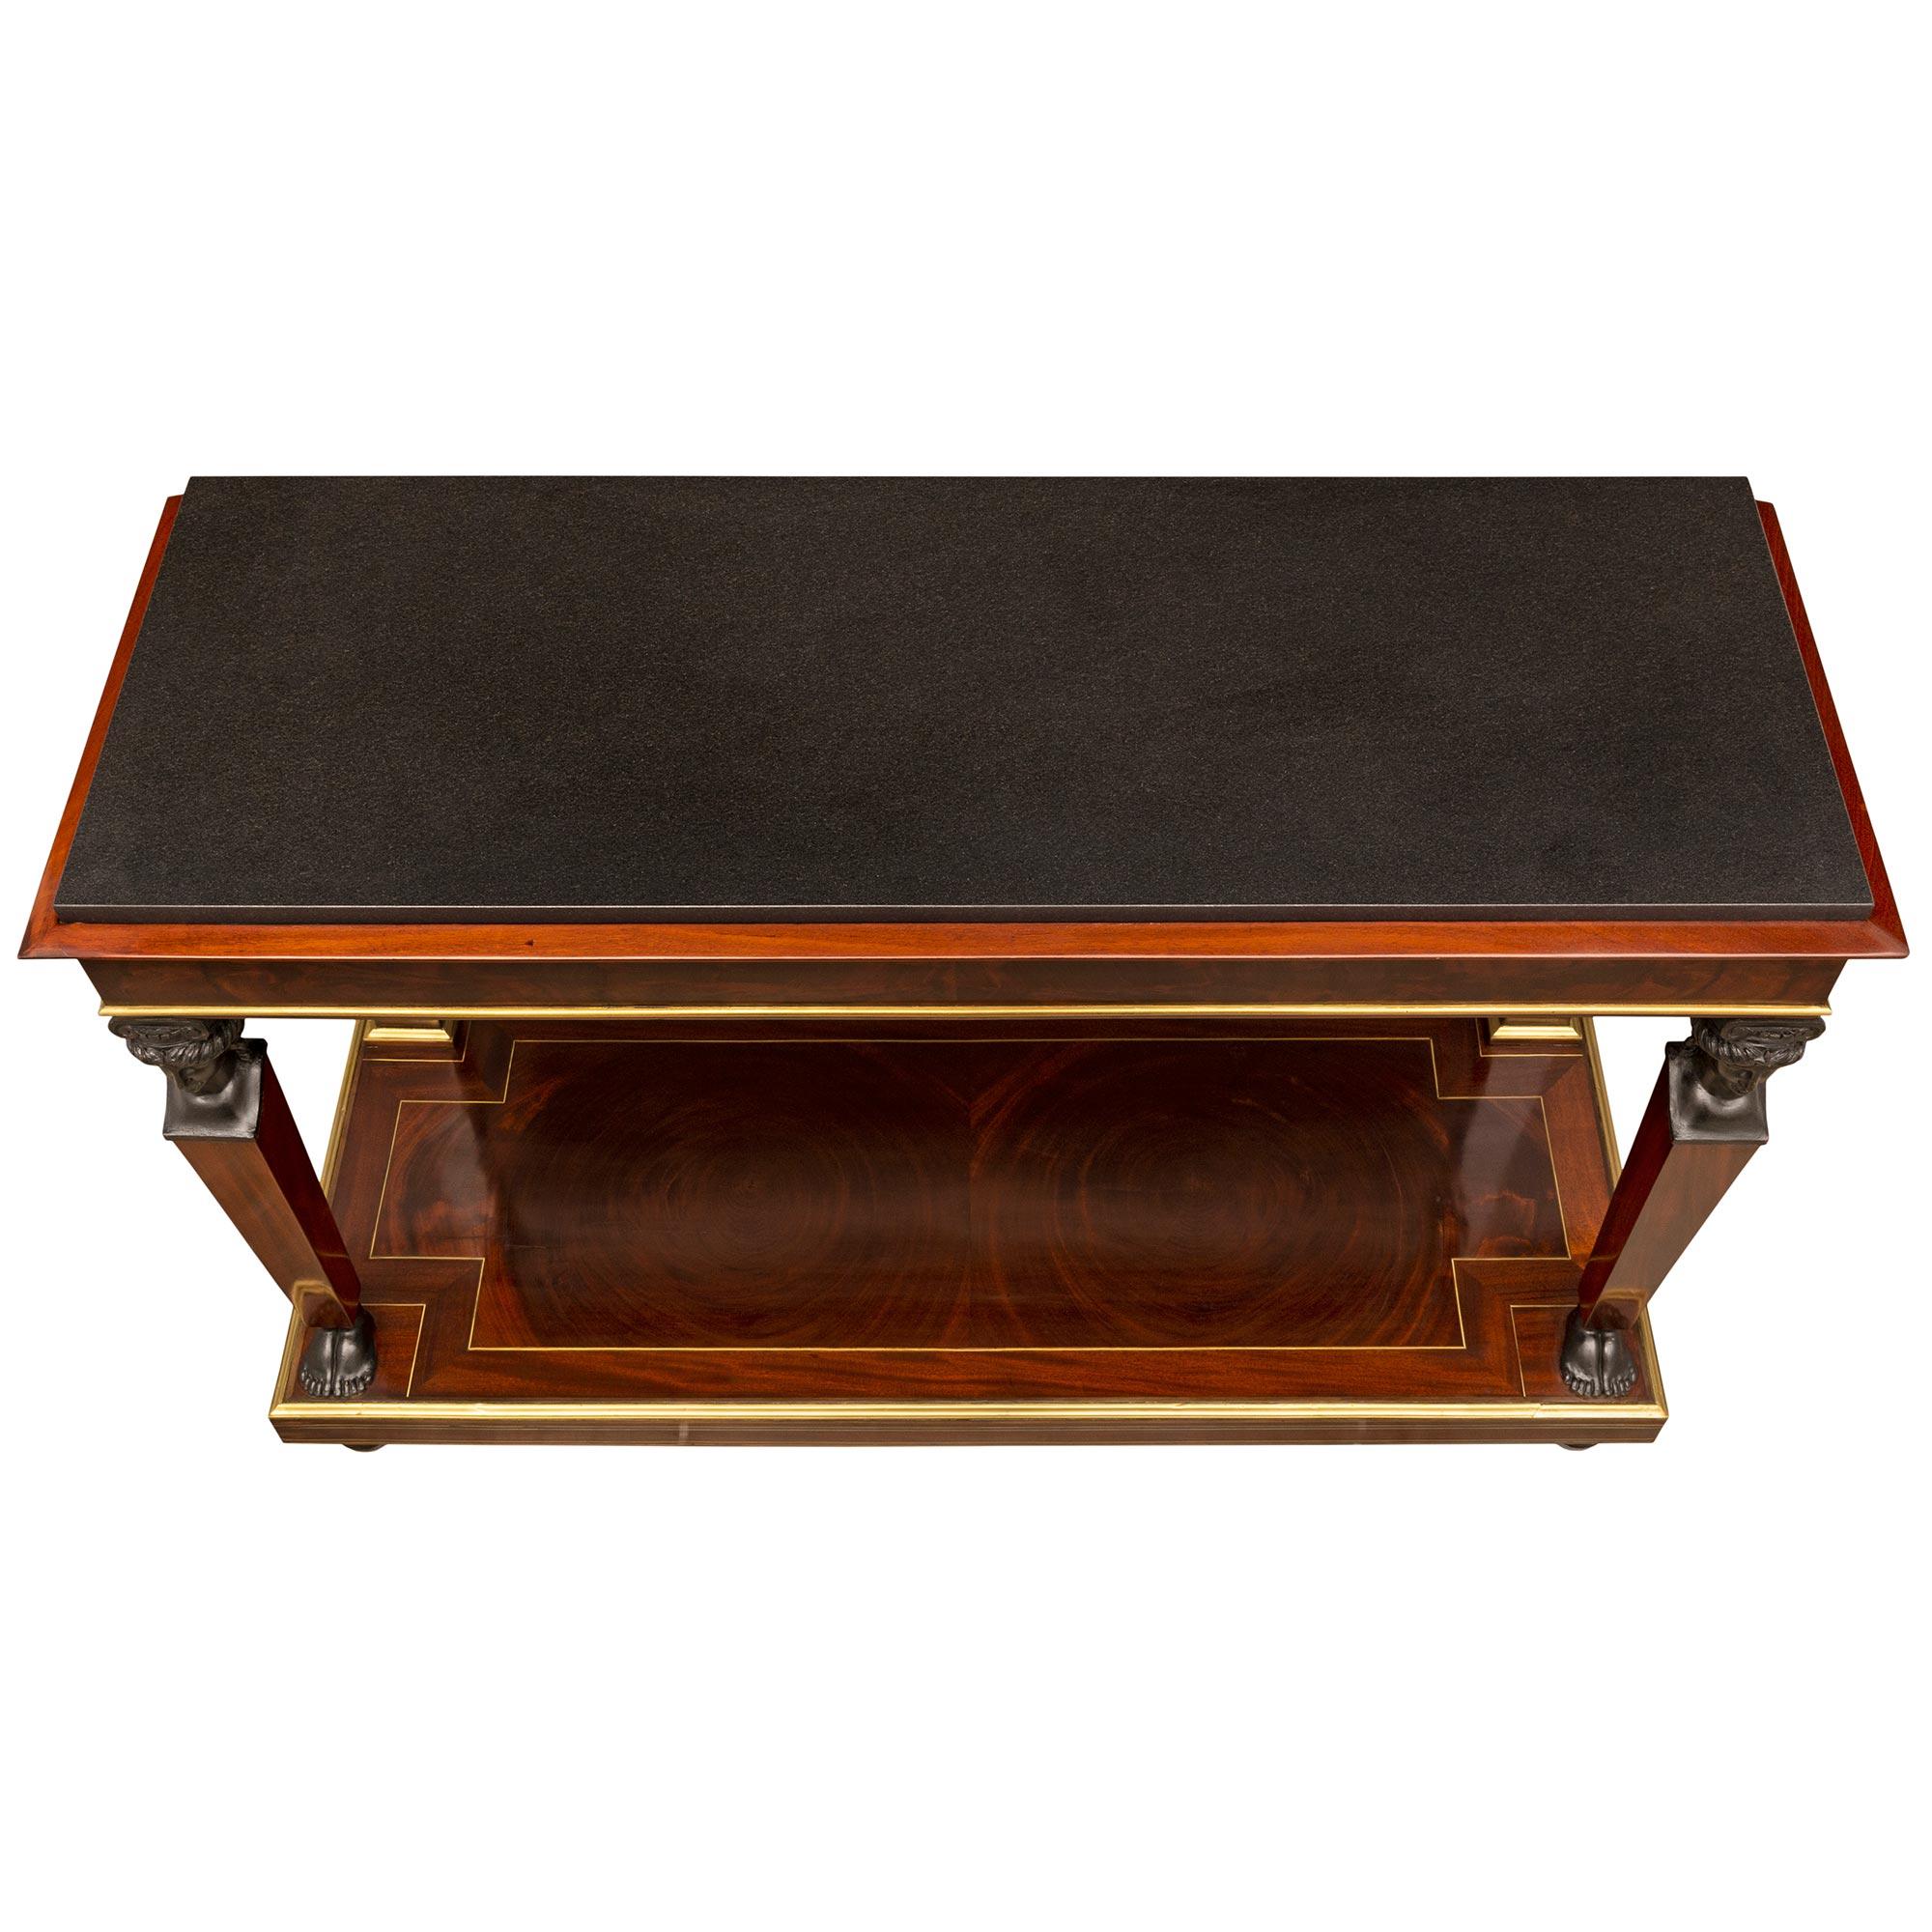 A striking French early 19th century 1st Empire period flamed mahogany, ebonized fruitwood, brass and black Belgian marble console. The two tiered freestanding console is raised by fine ball feet with most decorative brass fillets extending along